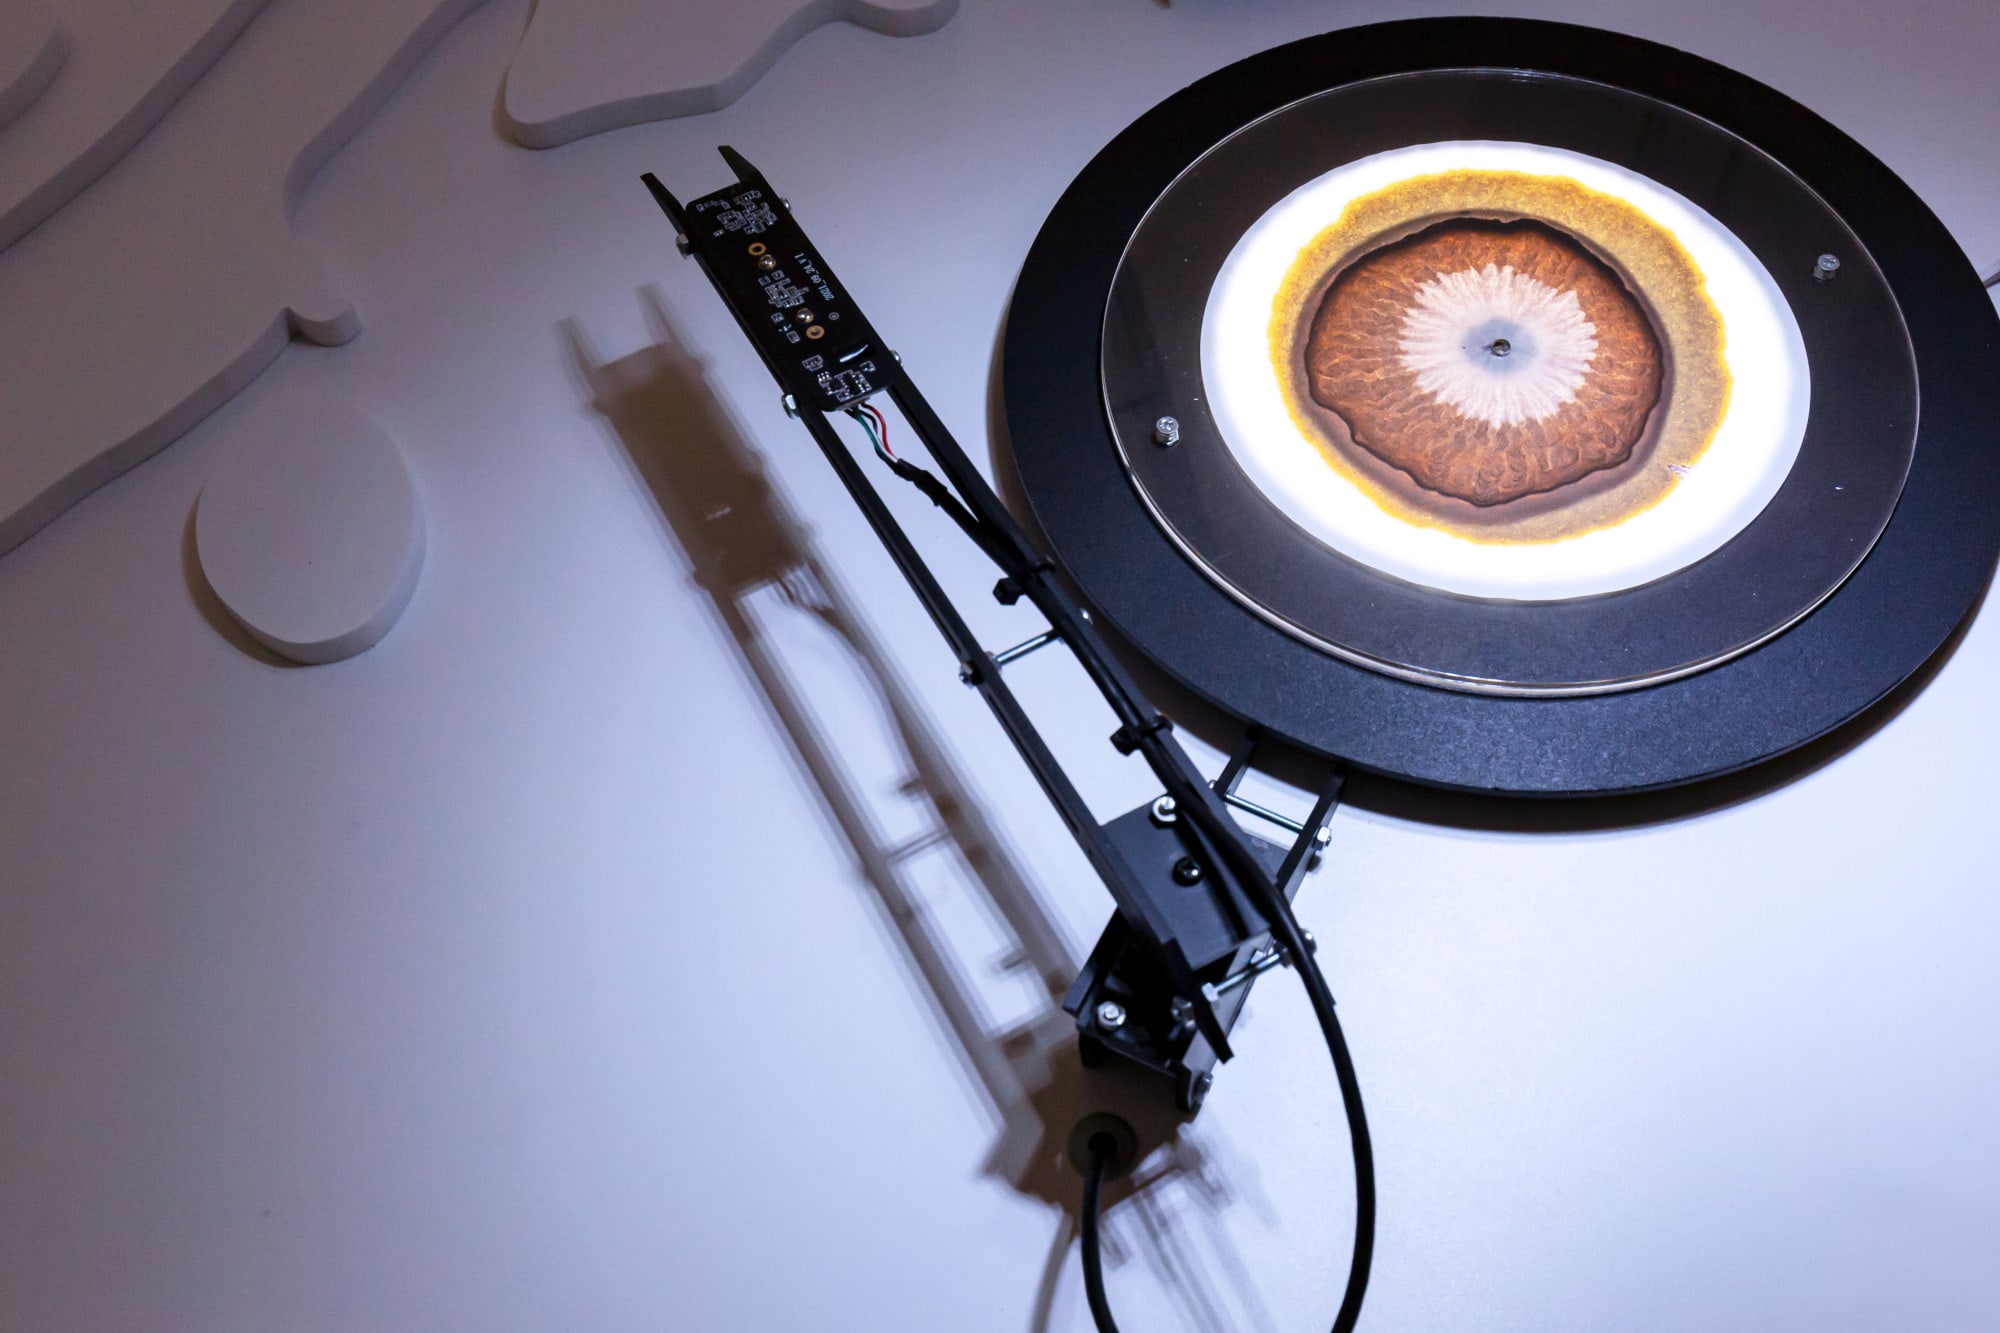 a disc with brown circular forms on a scanner that resembles a turntable